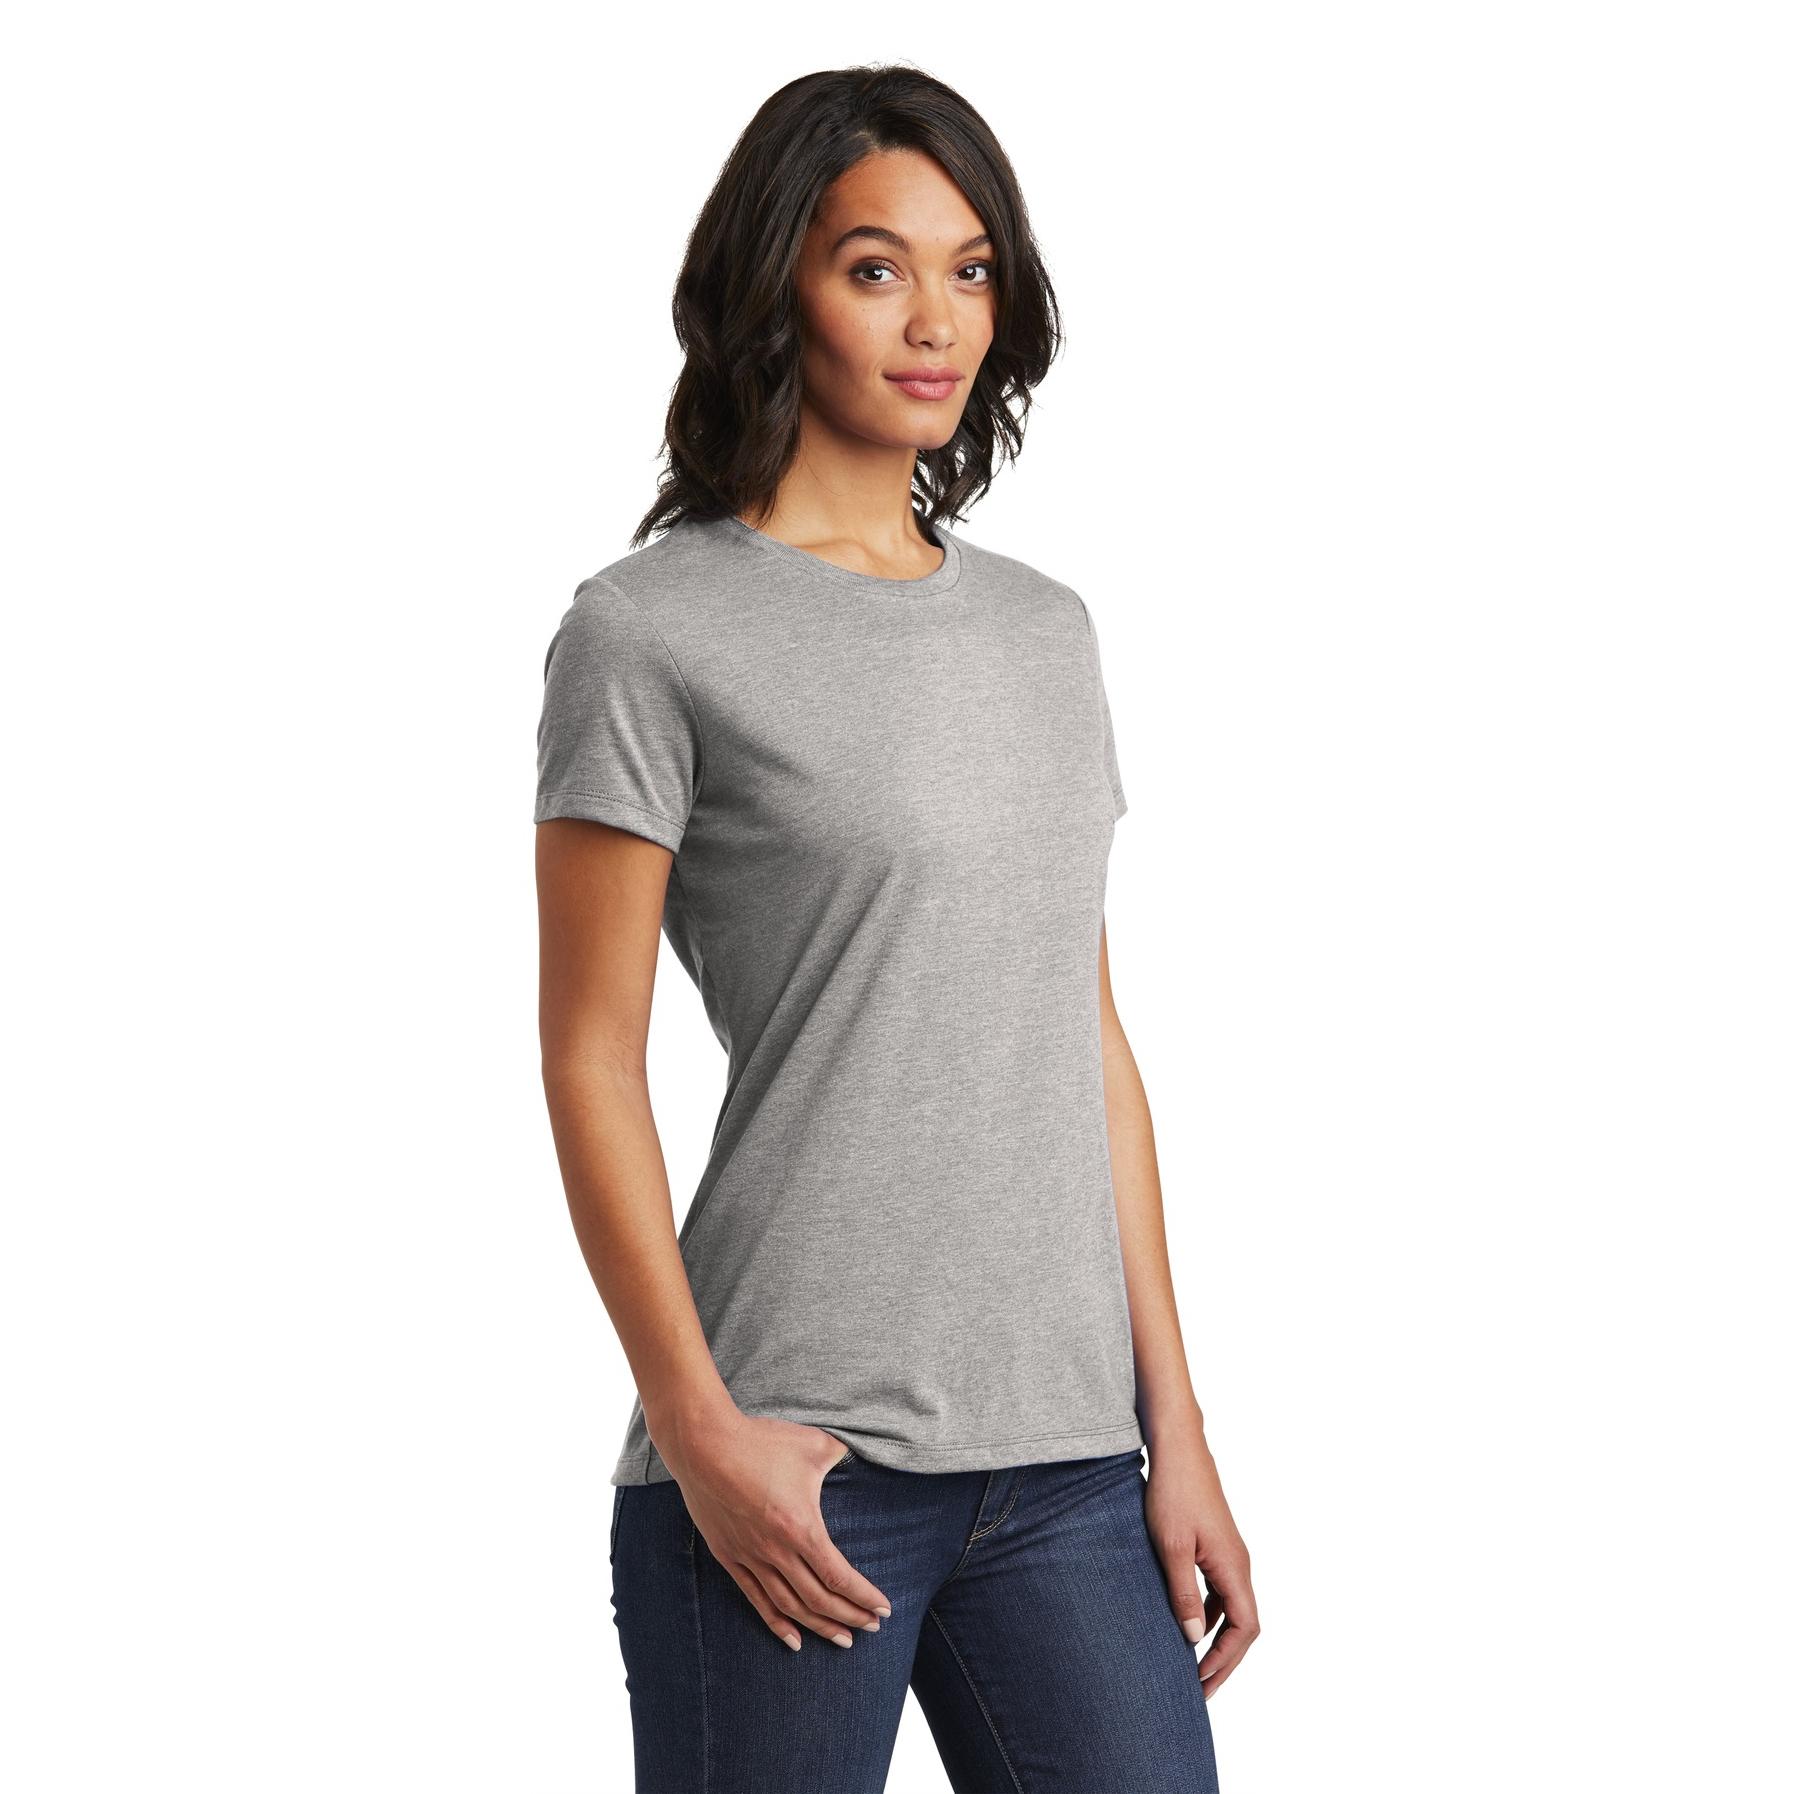 District DT6002 Women's Very Important Tee - Light Heather Grey | Full ...